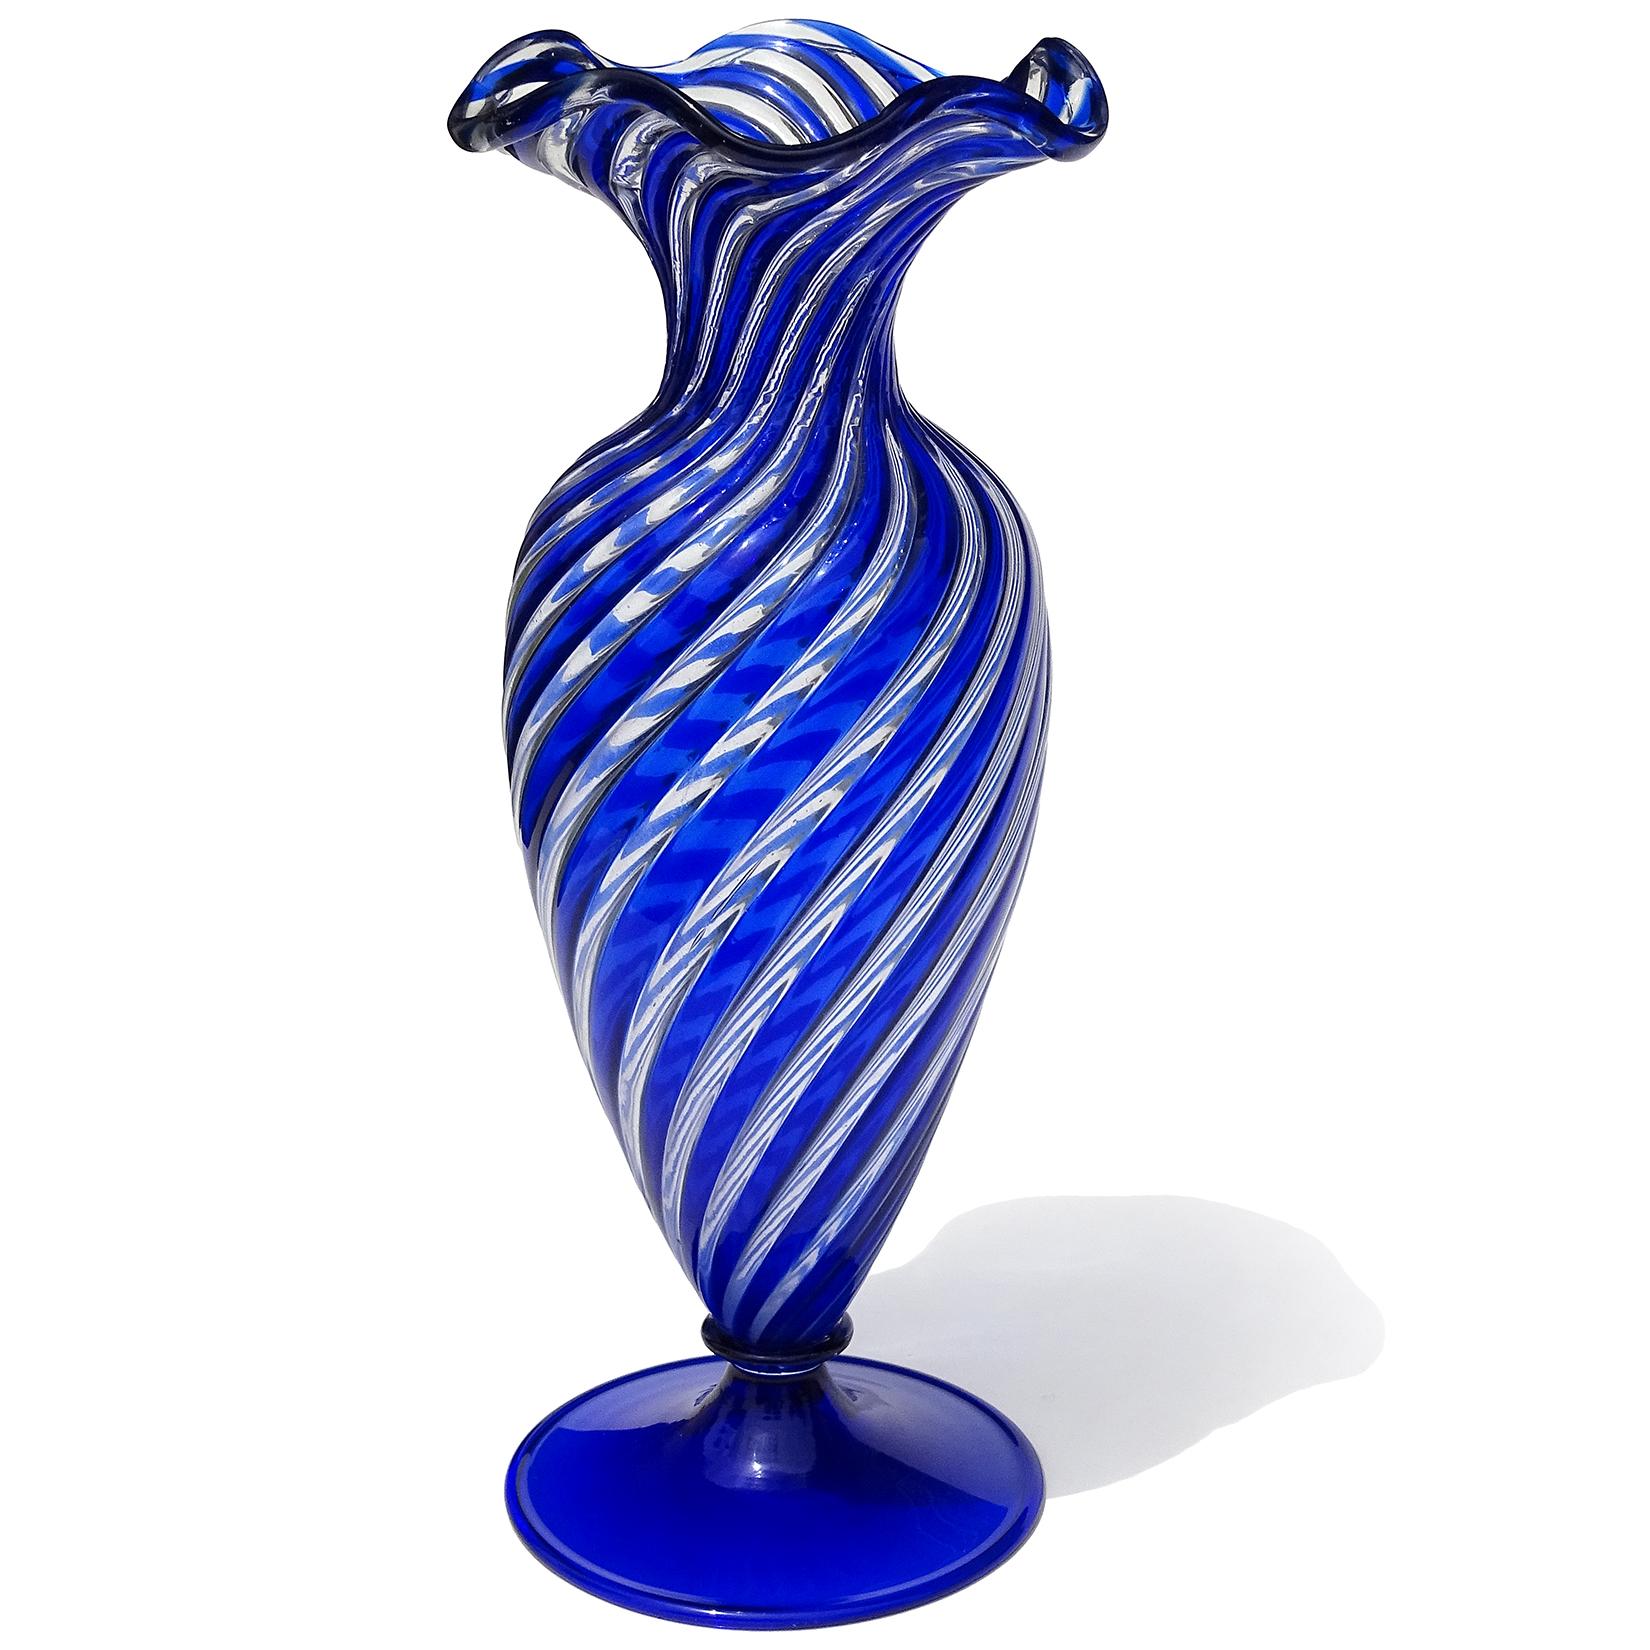 Beautiful vintage Murano hand blown sapphire blue and clear Italian art glass footed flower vase. Documented to the Arte Vetraria Muranese (A.Ve.M.) company. The vase is created in the “A Canne” technique, with blue and clear rods of glass